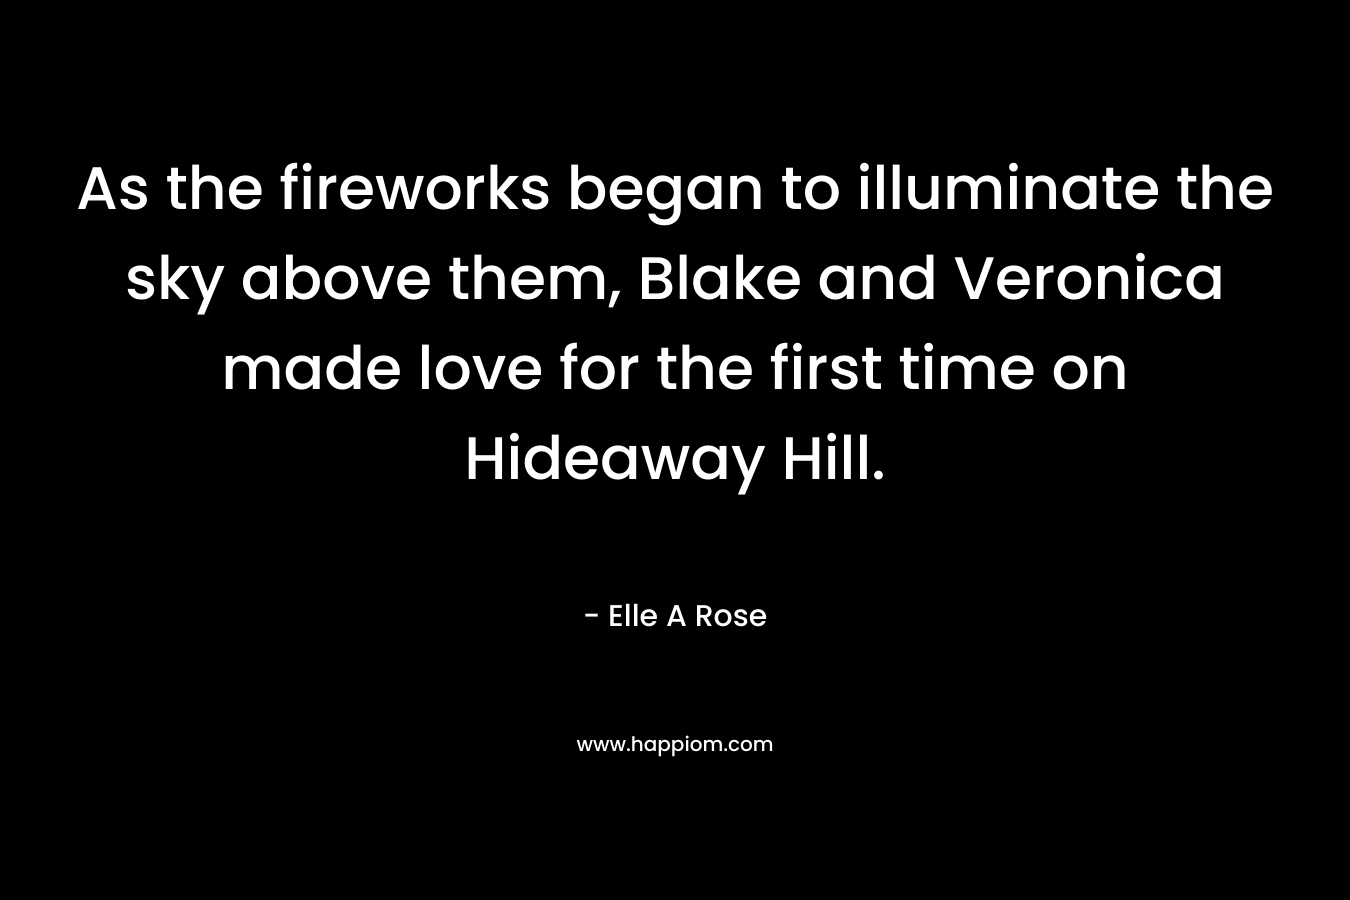 As the fireworks began to illuminate the sky above them, Blake and Veronica made love for the first time on Hideaway Hill.